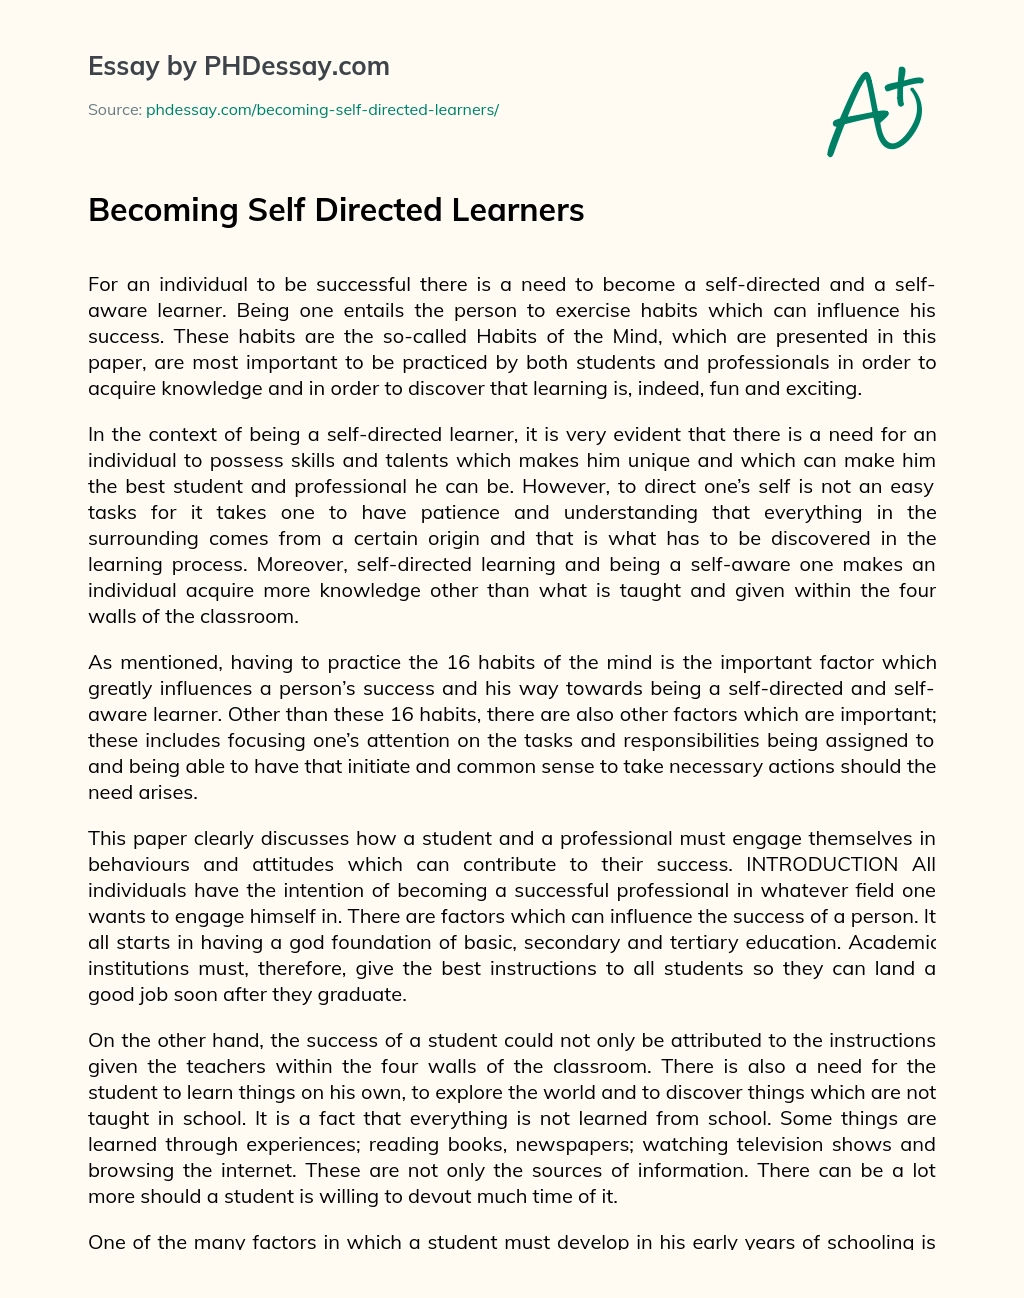 Becoming Self Directed Learners essay